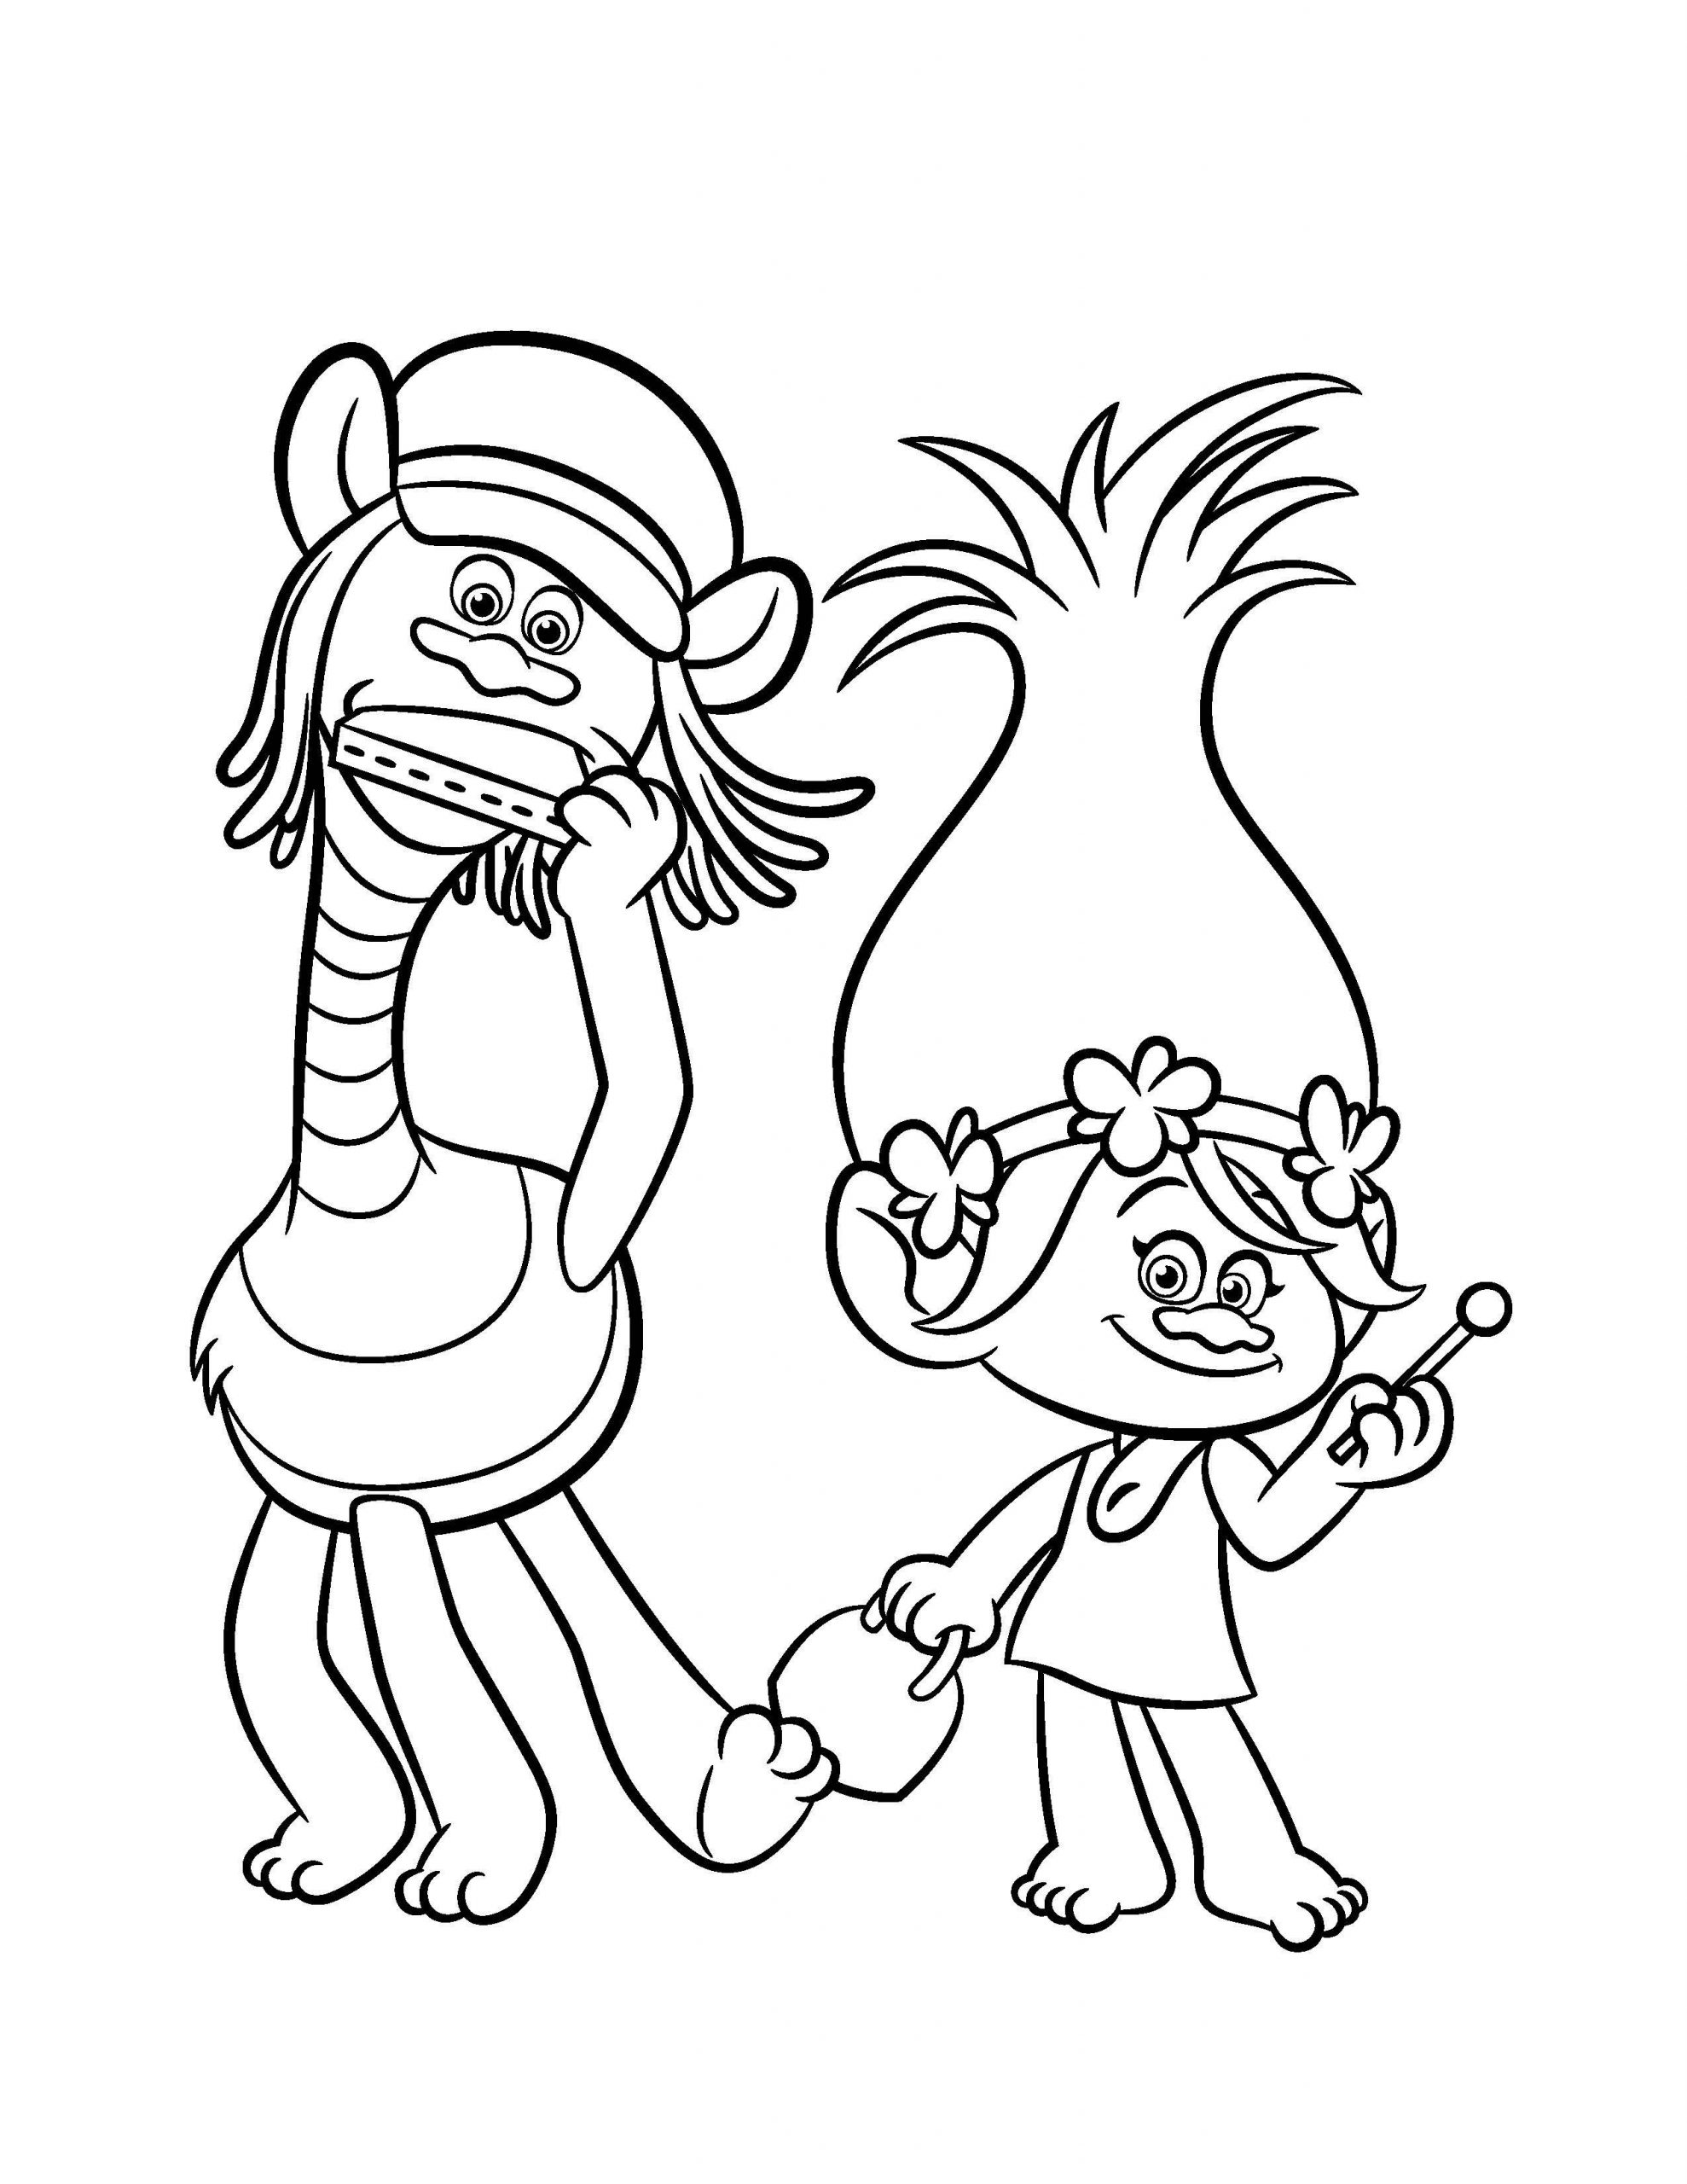 Cooper And Poppy Coloring Page - Free Printable Coloring Pages for Kids